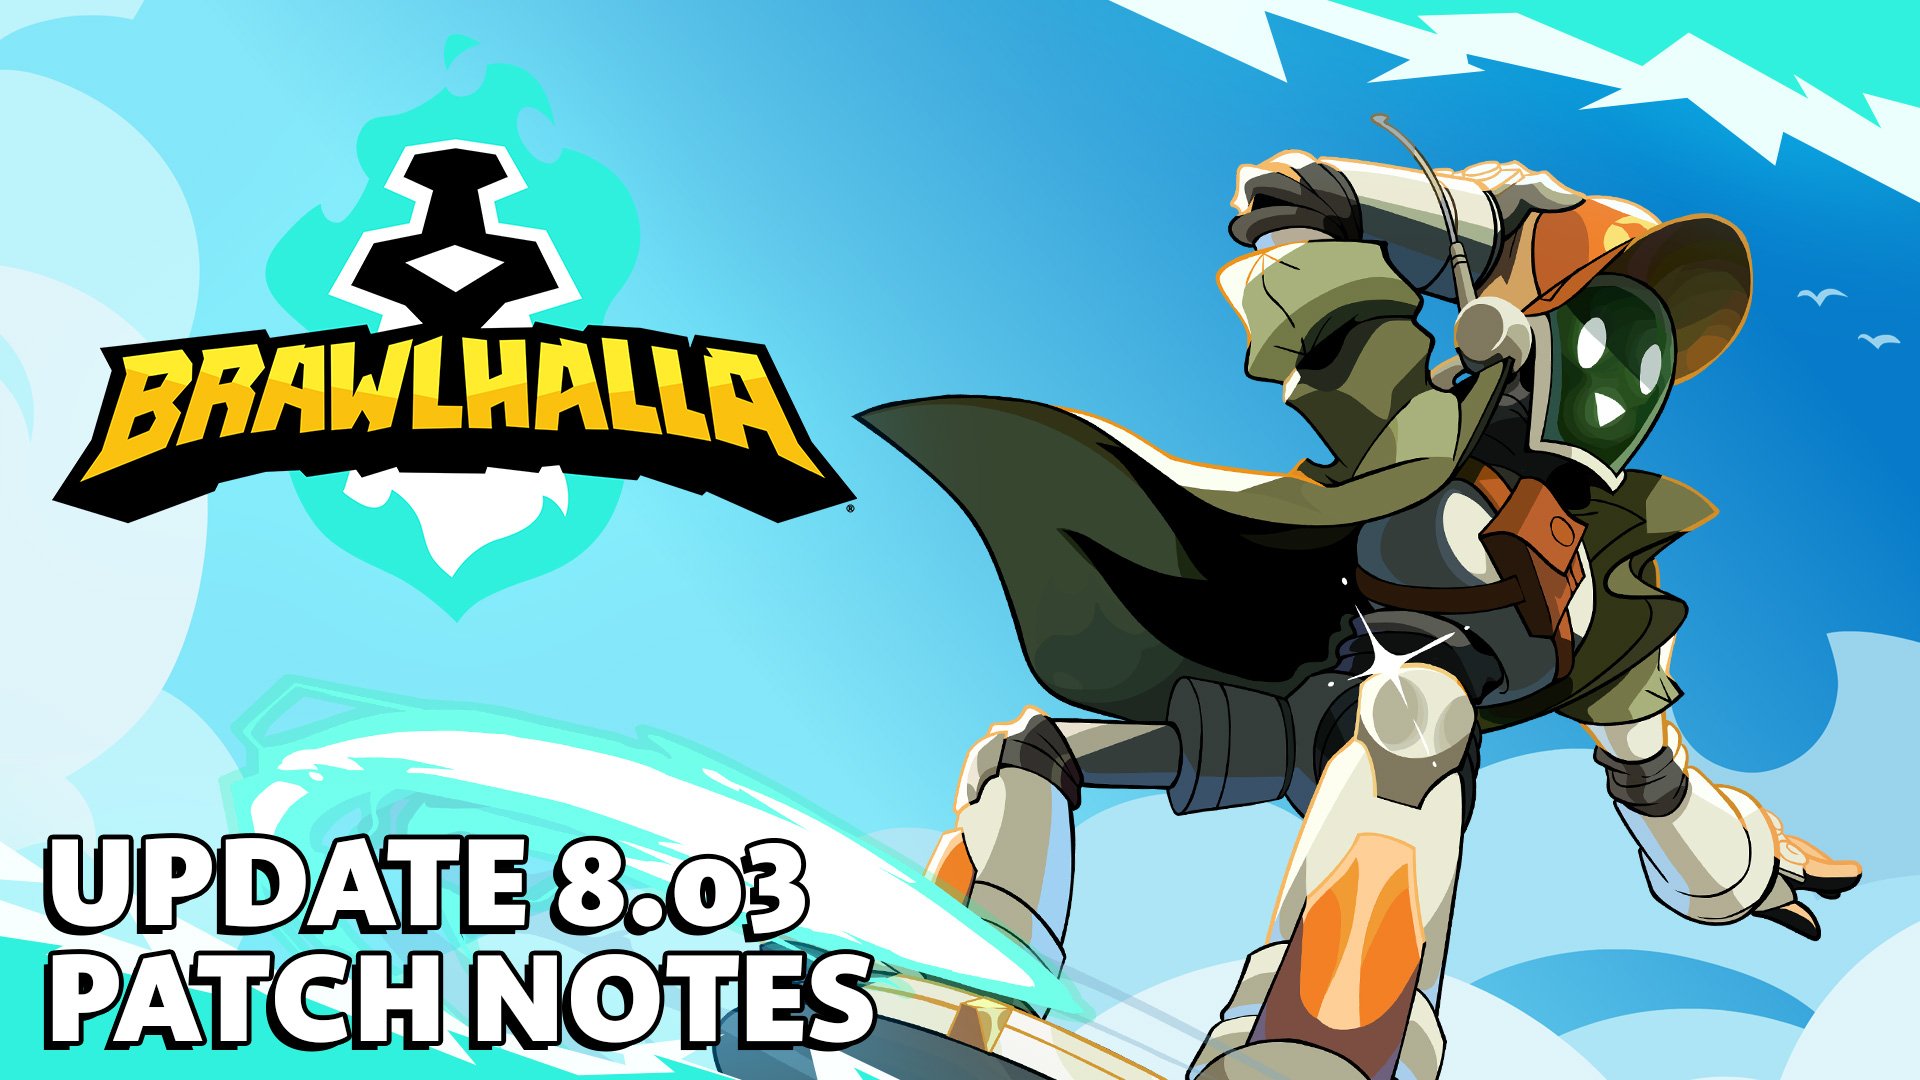 New Legend: Seven, Brawlhallidays, and New Challenges! – Patch 8.03